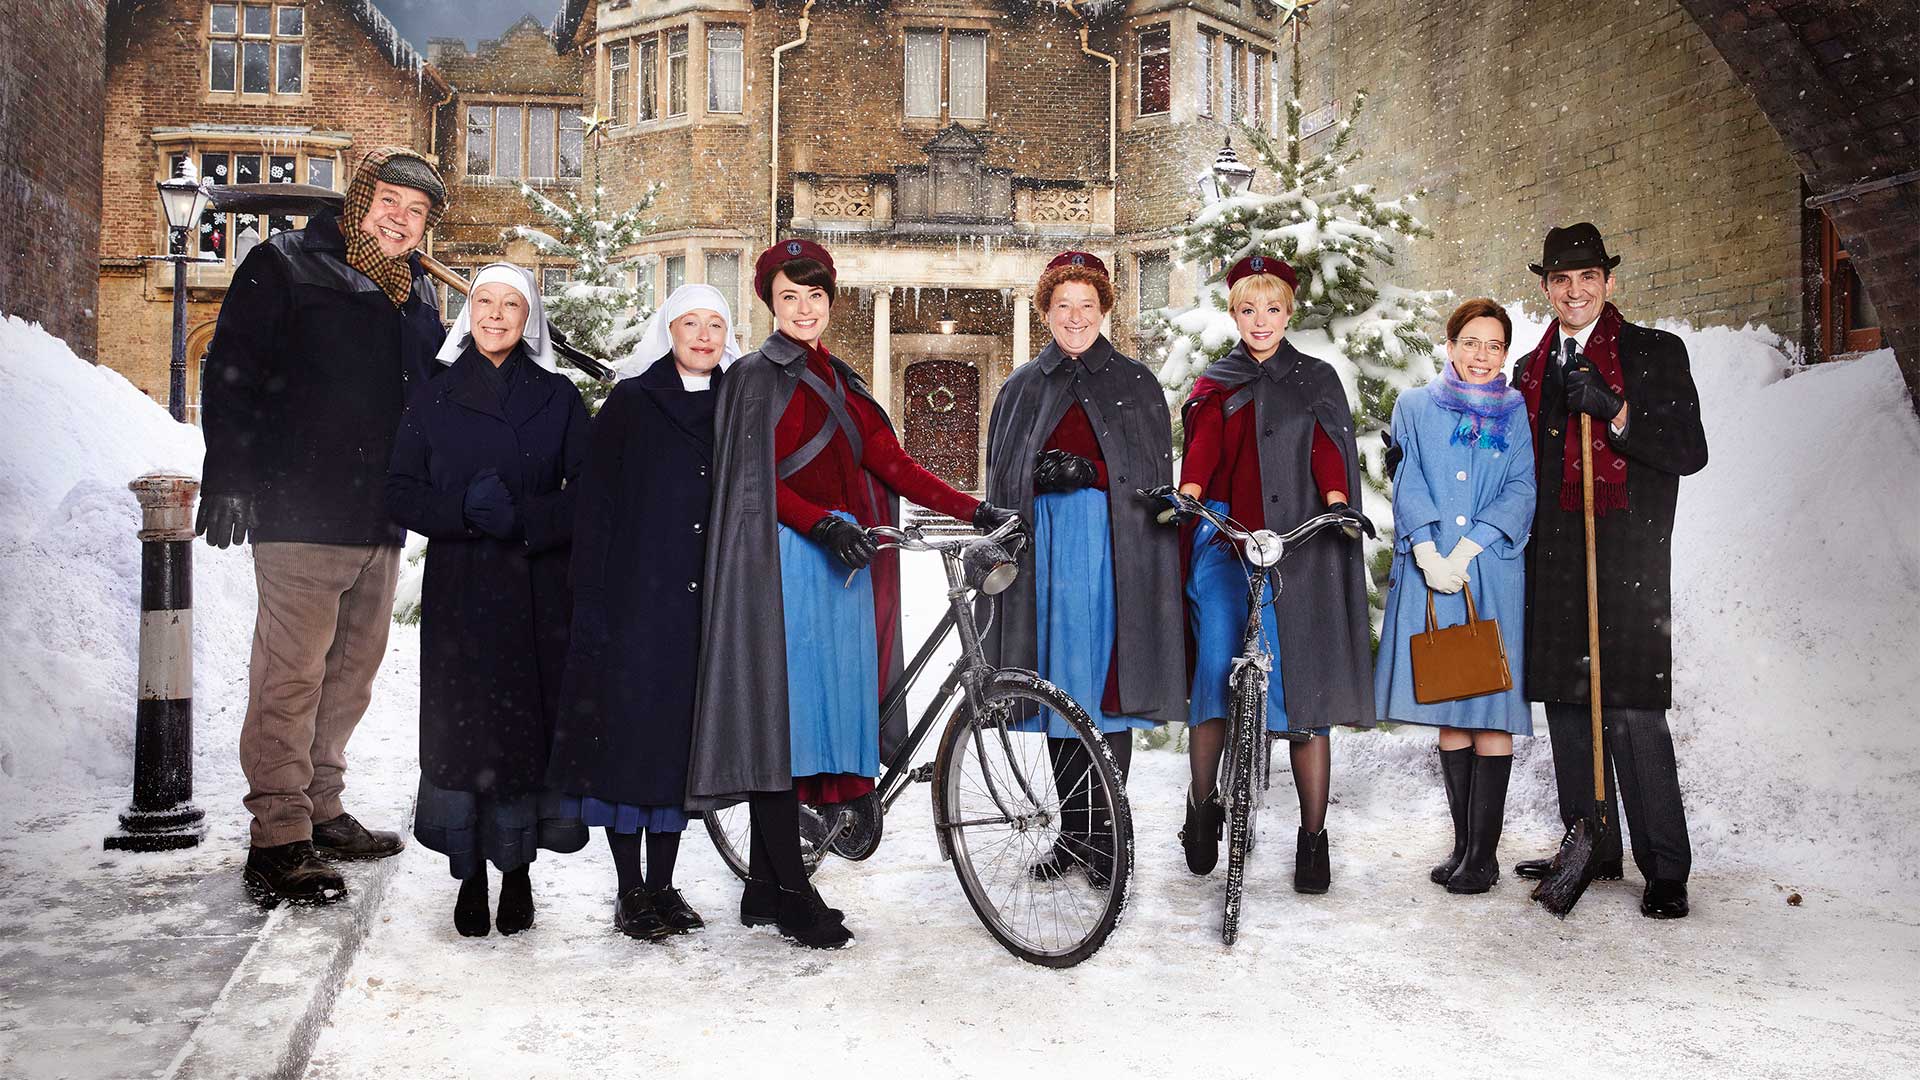 Cliff Parisi as Fred Buckle, Jenny Agutter as Sister Julienne, Victoria Yeates as Sister Winifred, Jennifer Kirby as Valerie Dyer, Linda Bassett as Nurse Phyllis, Helen George as Trixie Franklin, Laura Main as Shelagh Turner & Stephen McGann as Dr Patrick Turner